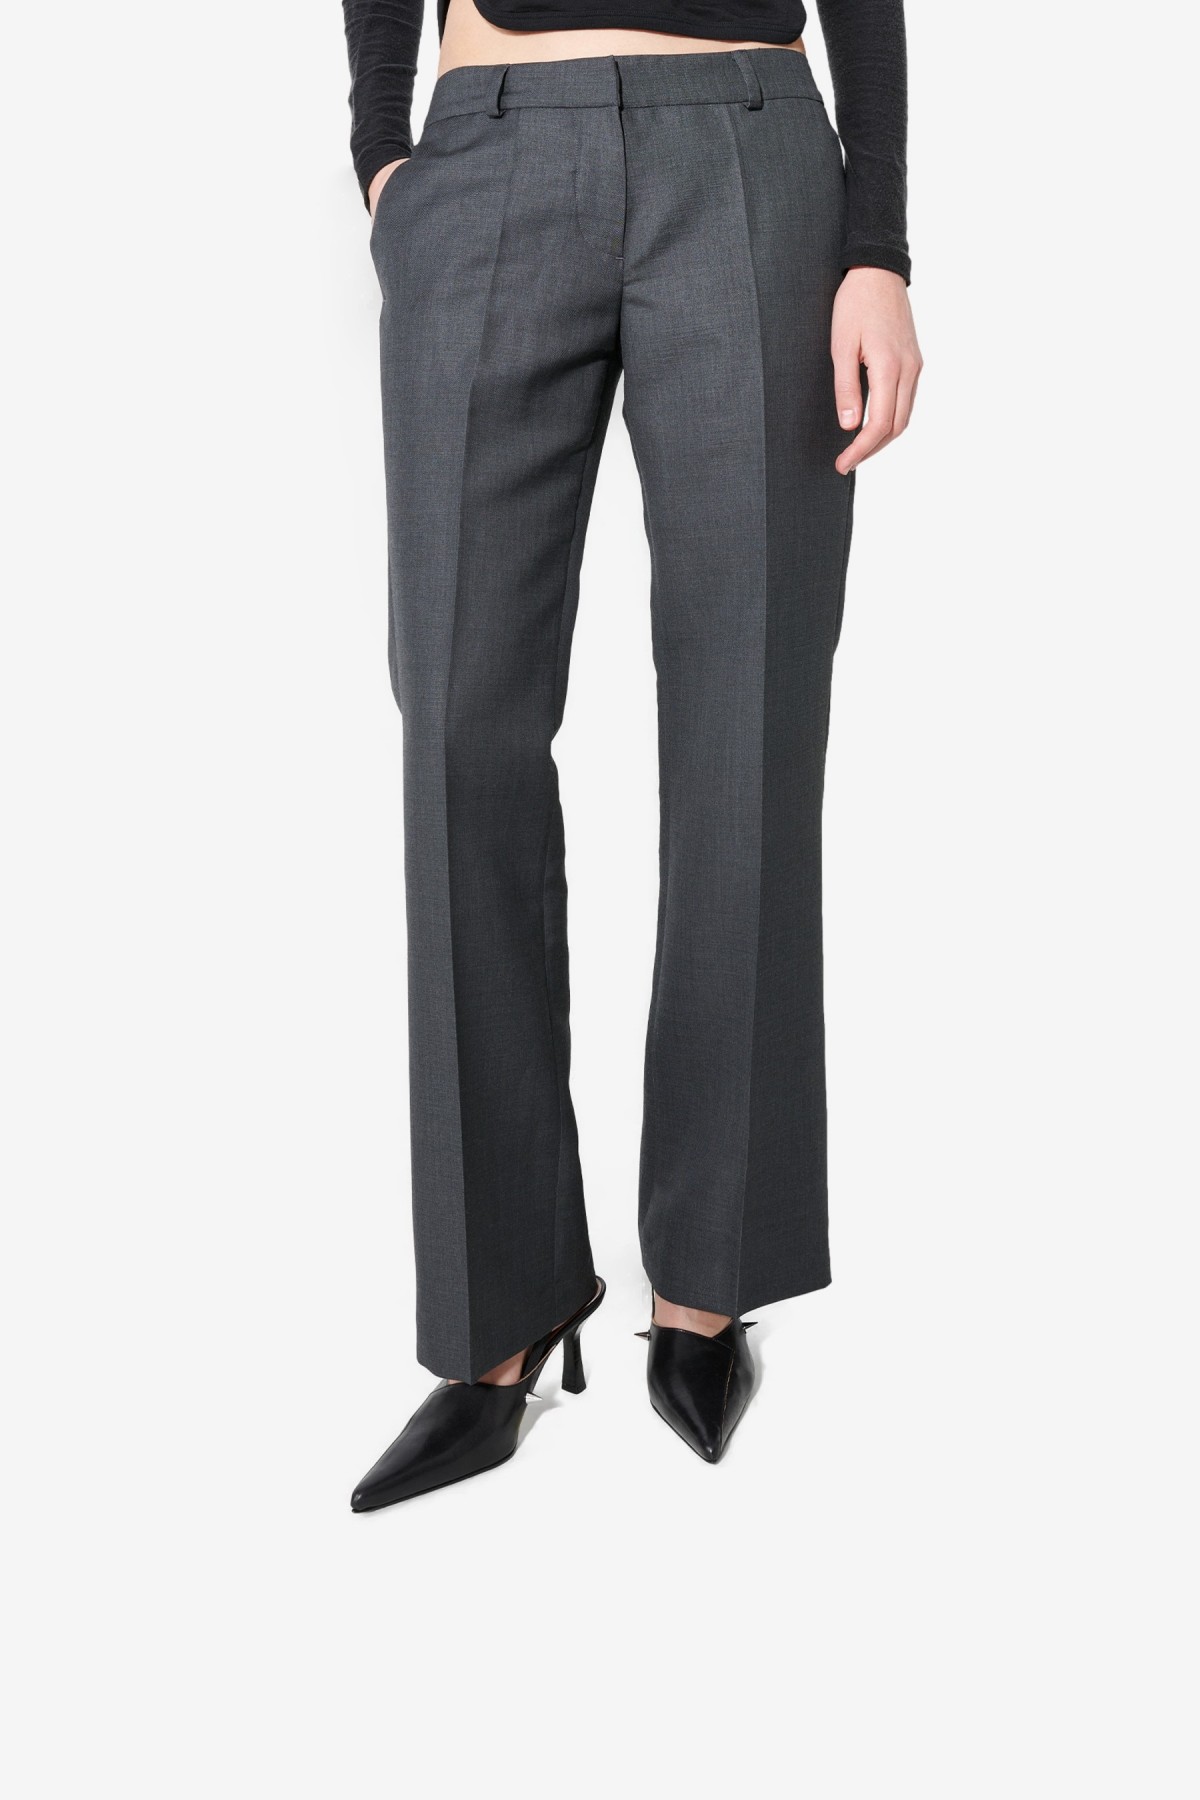 Our Legacy Hip Trouser in 